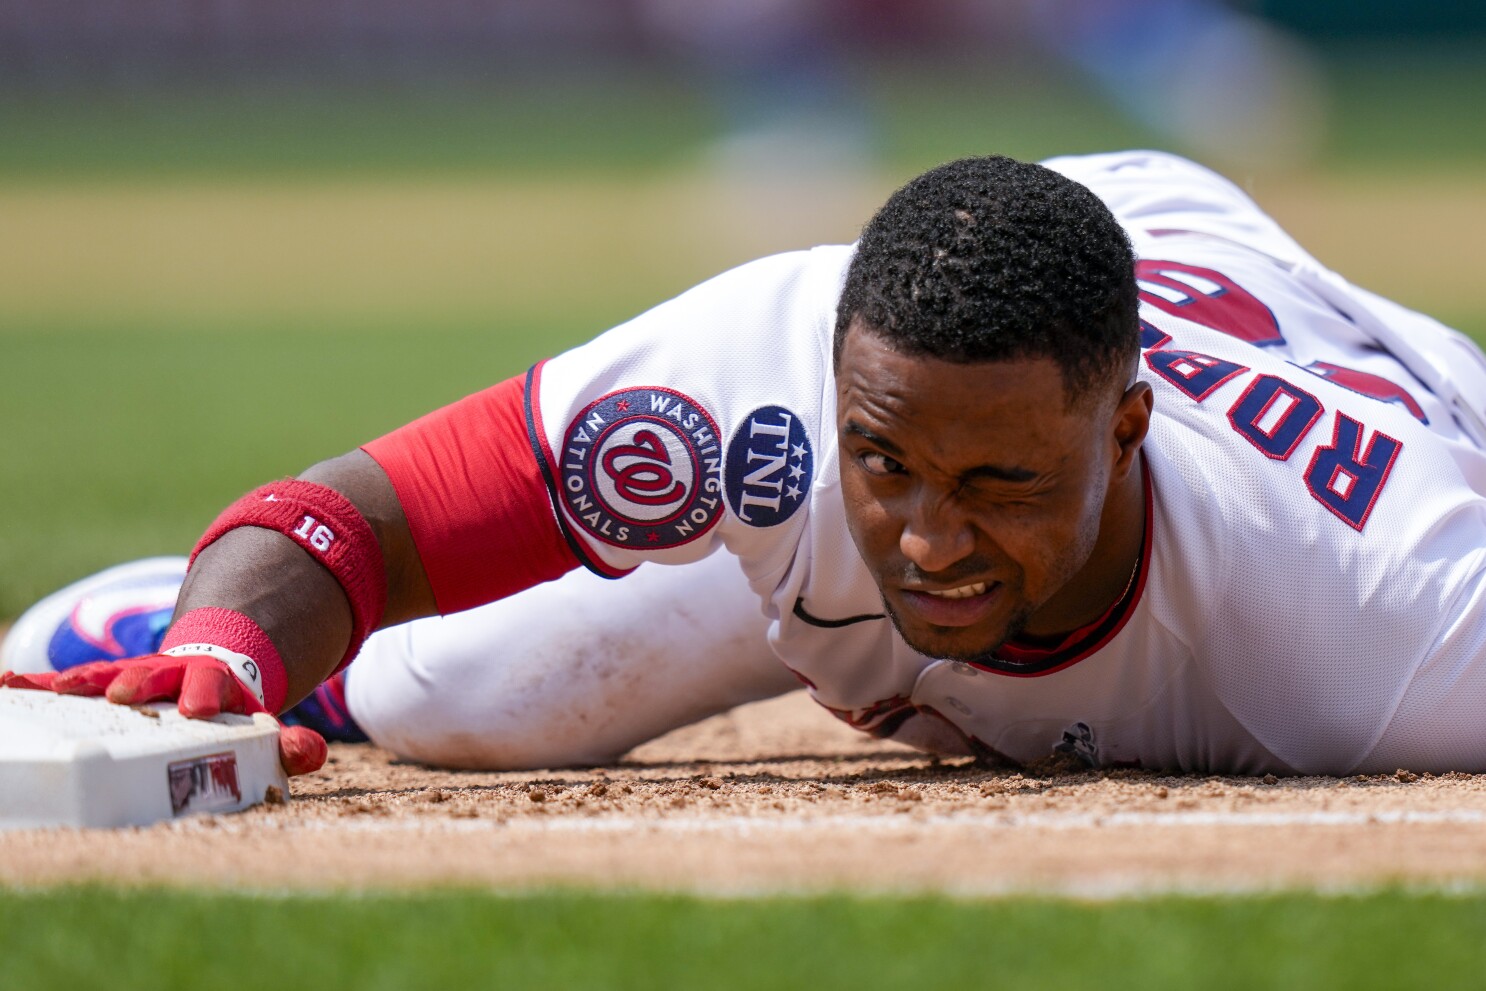 Nationals' Victor Robles tried to become a player he was not. Now